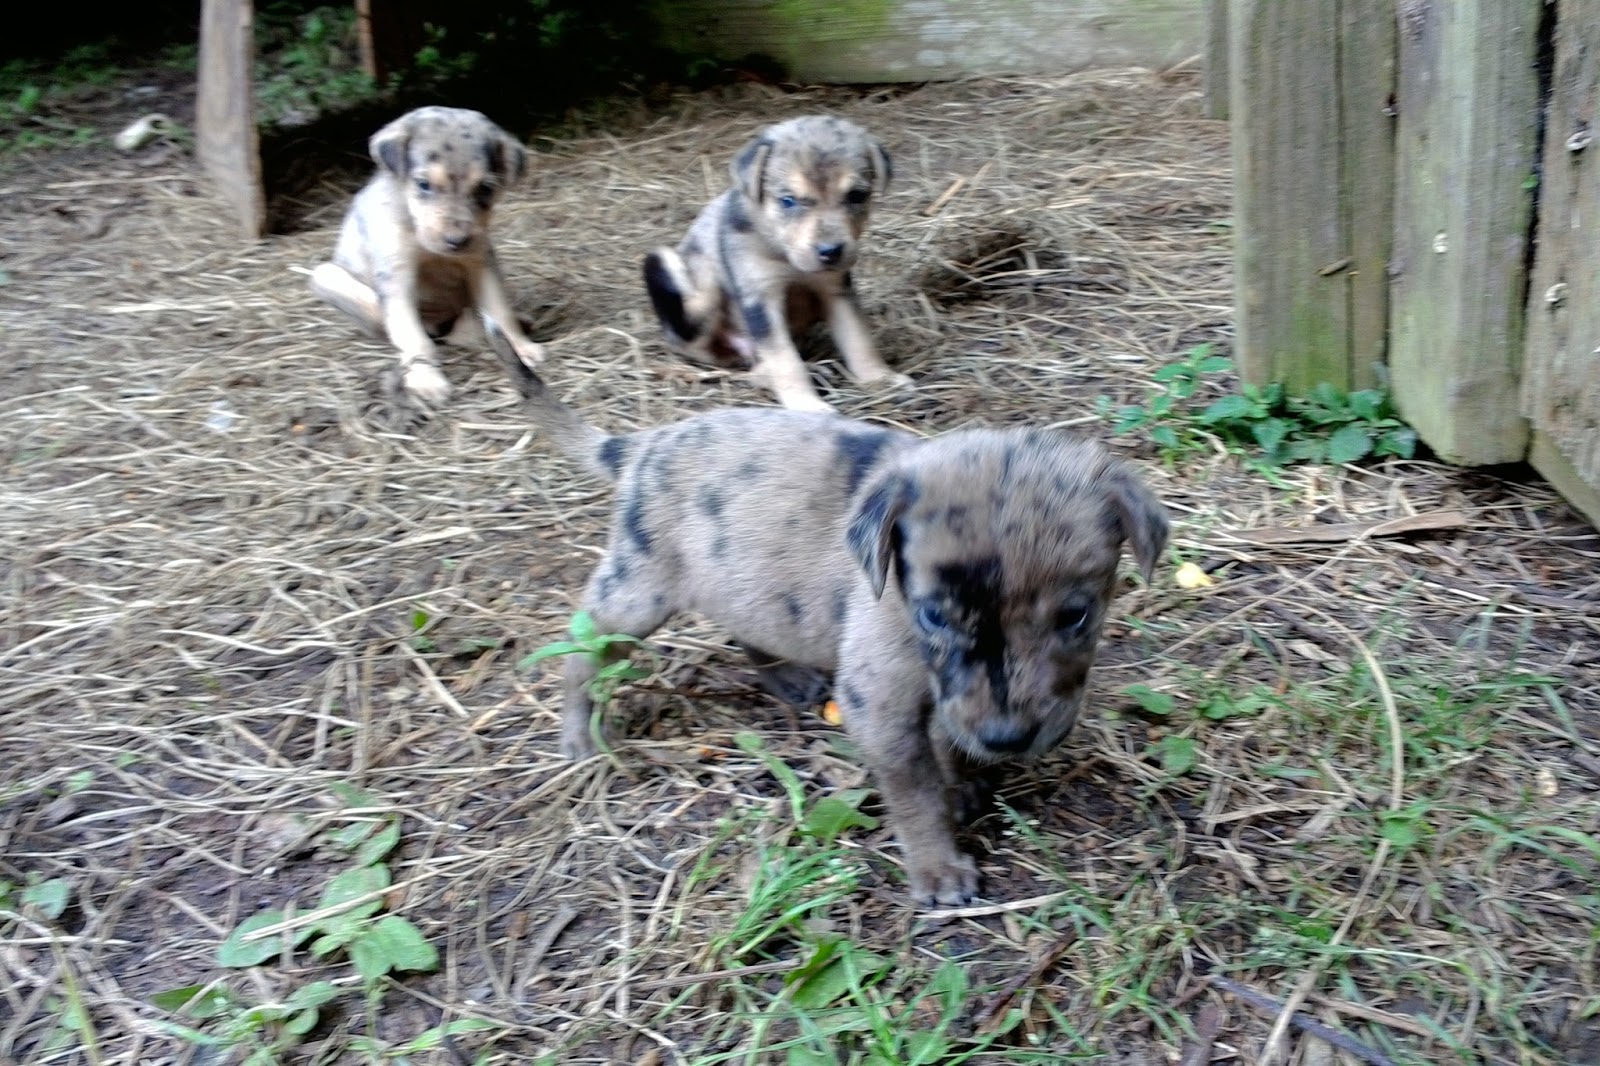 Catahoula Puppies: Catahoula puppies for sale out of Beautiful and Luke ...